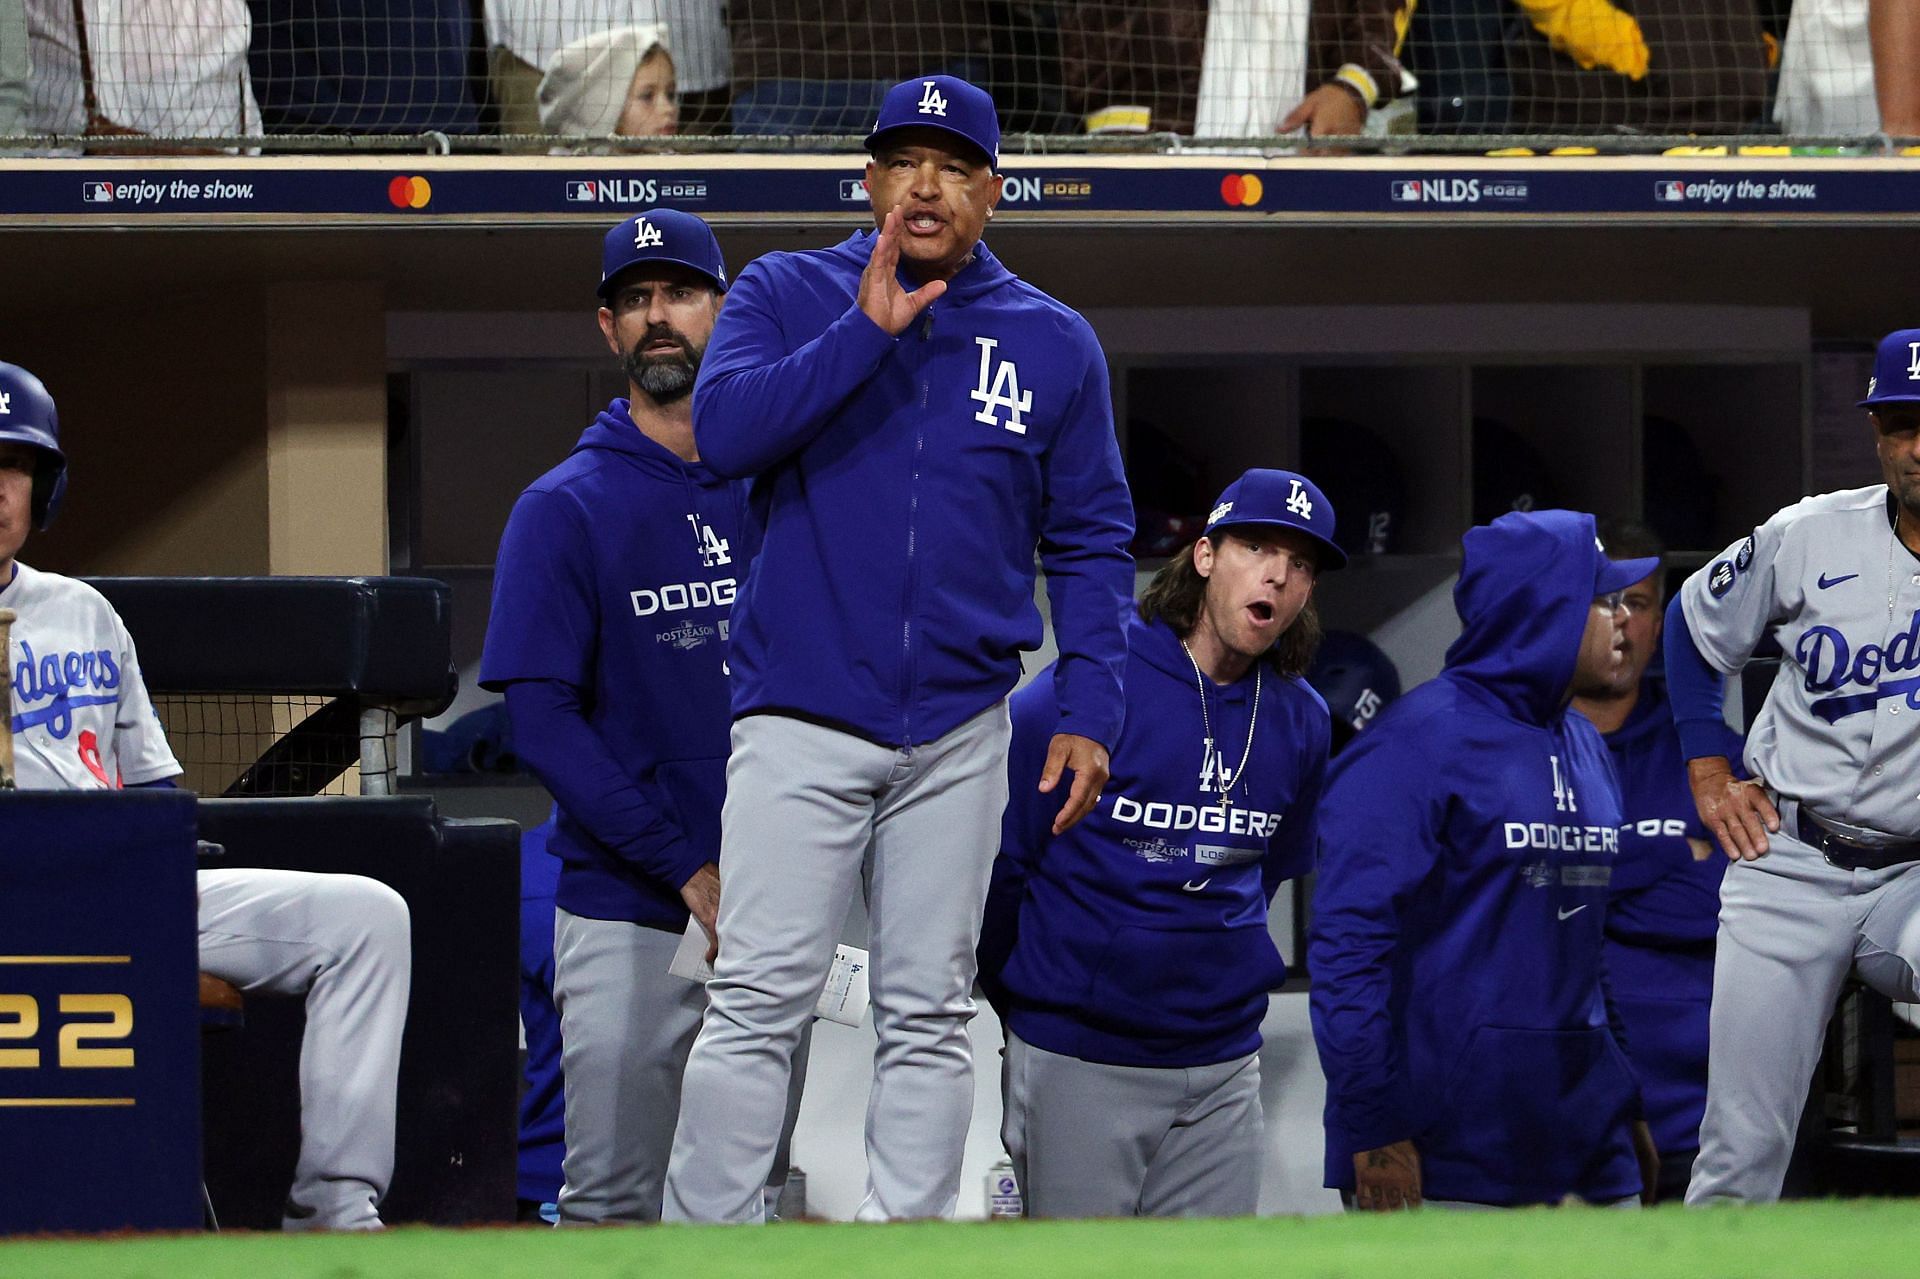 Los Angeles Dodgers - For all the #JocPops, playoff moments, a